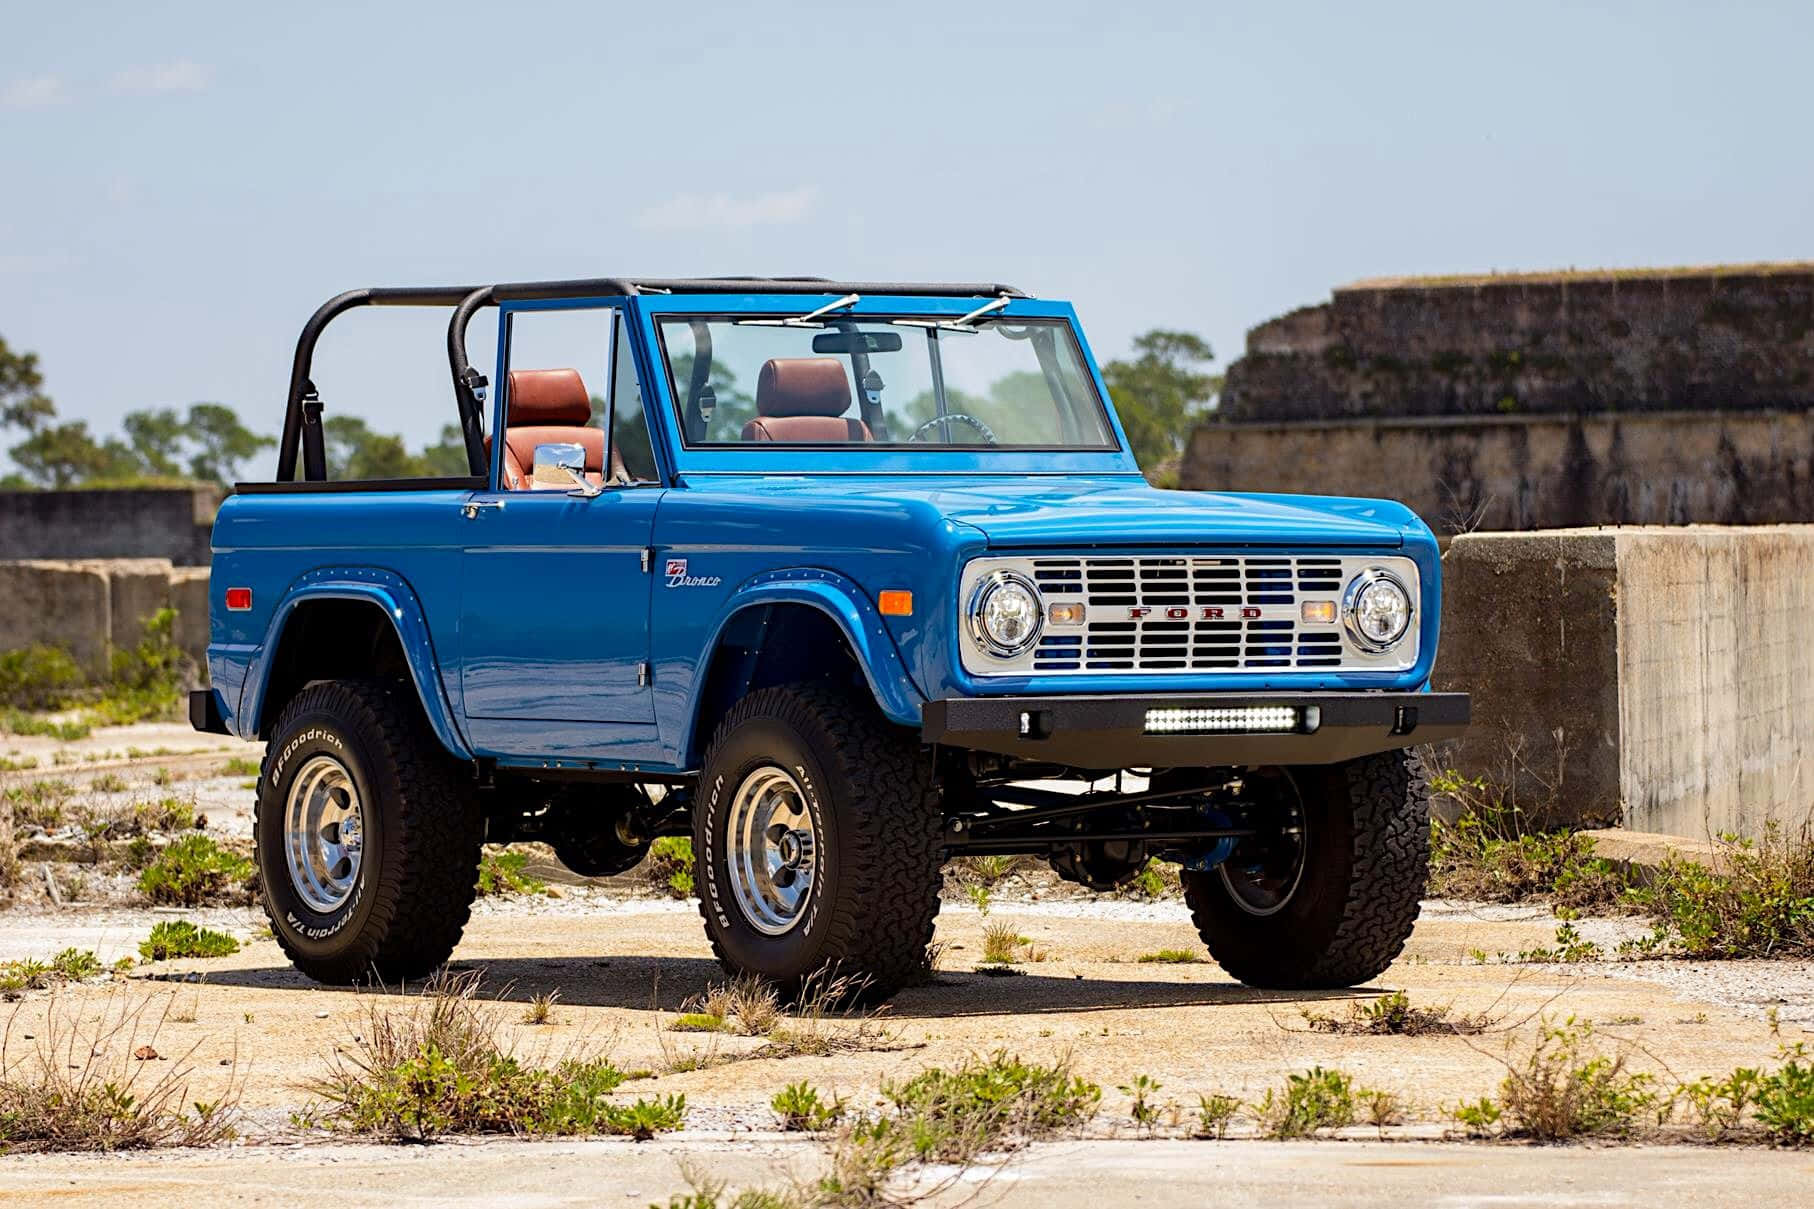 Explore the Great Outdoors with the Rugged and Agile Ford Bronco